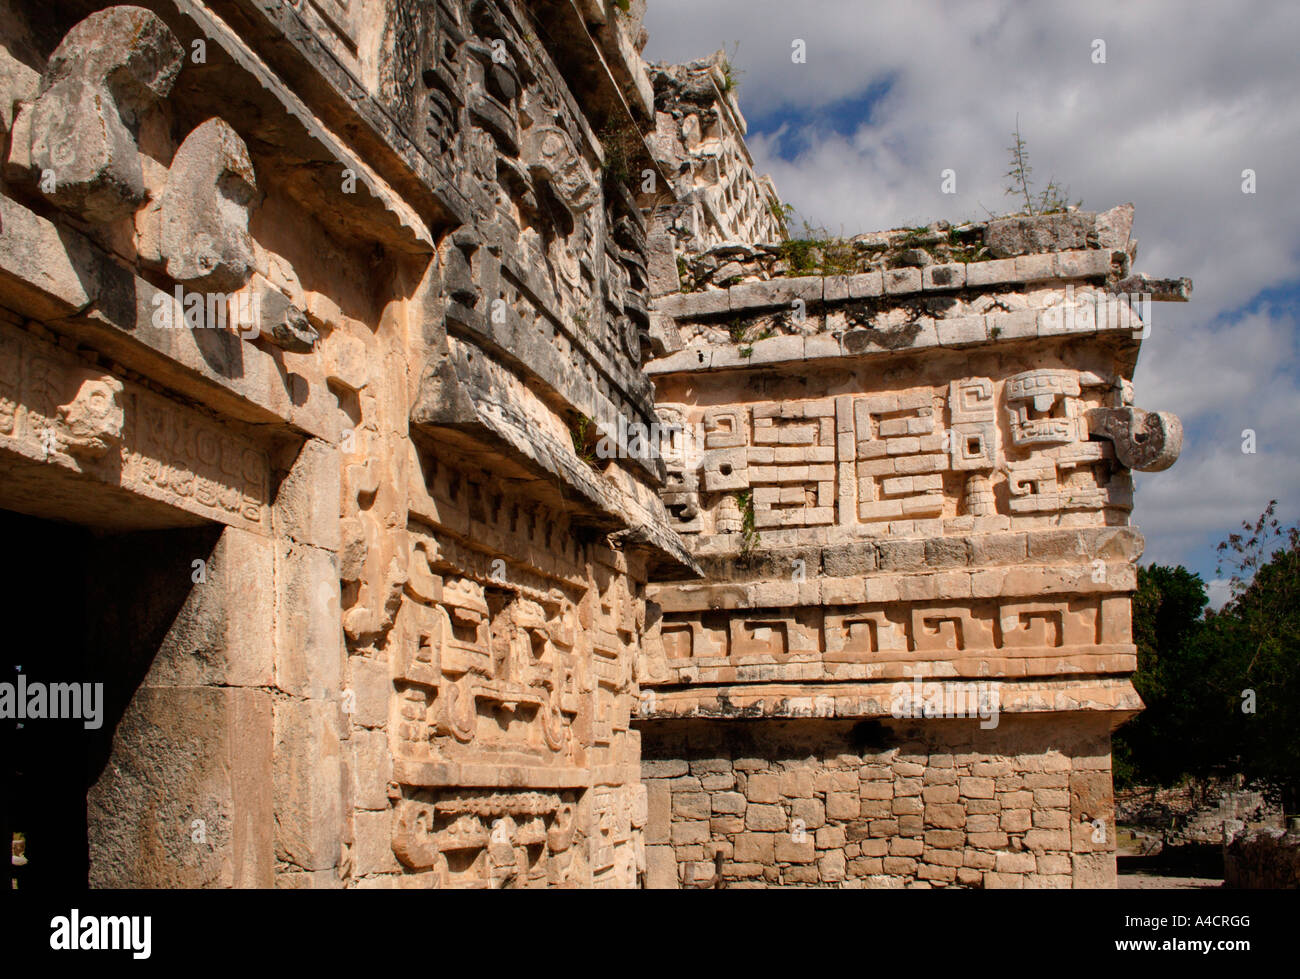 Chichen Itza's Puuc style buildings named for the Puuc Hills near Uxmal in Northern Yucatan feature the Rain God Chaac. Stock Photo